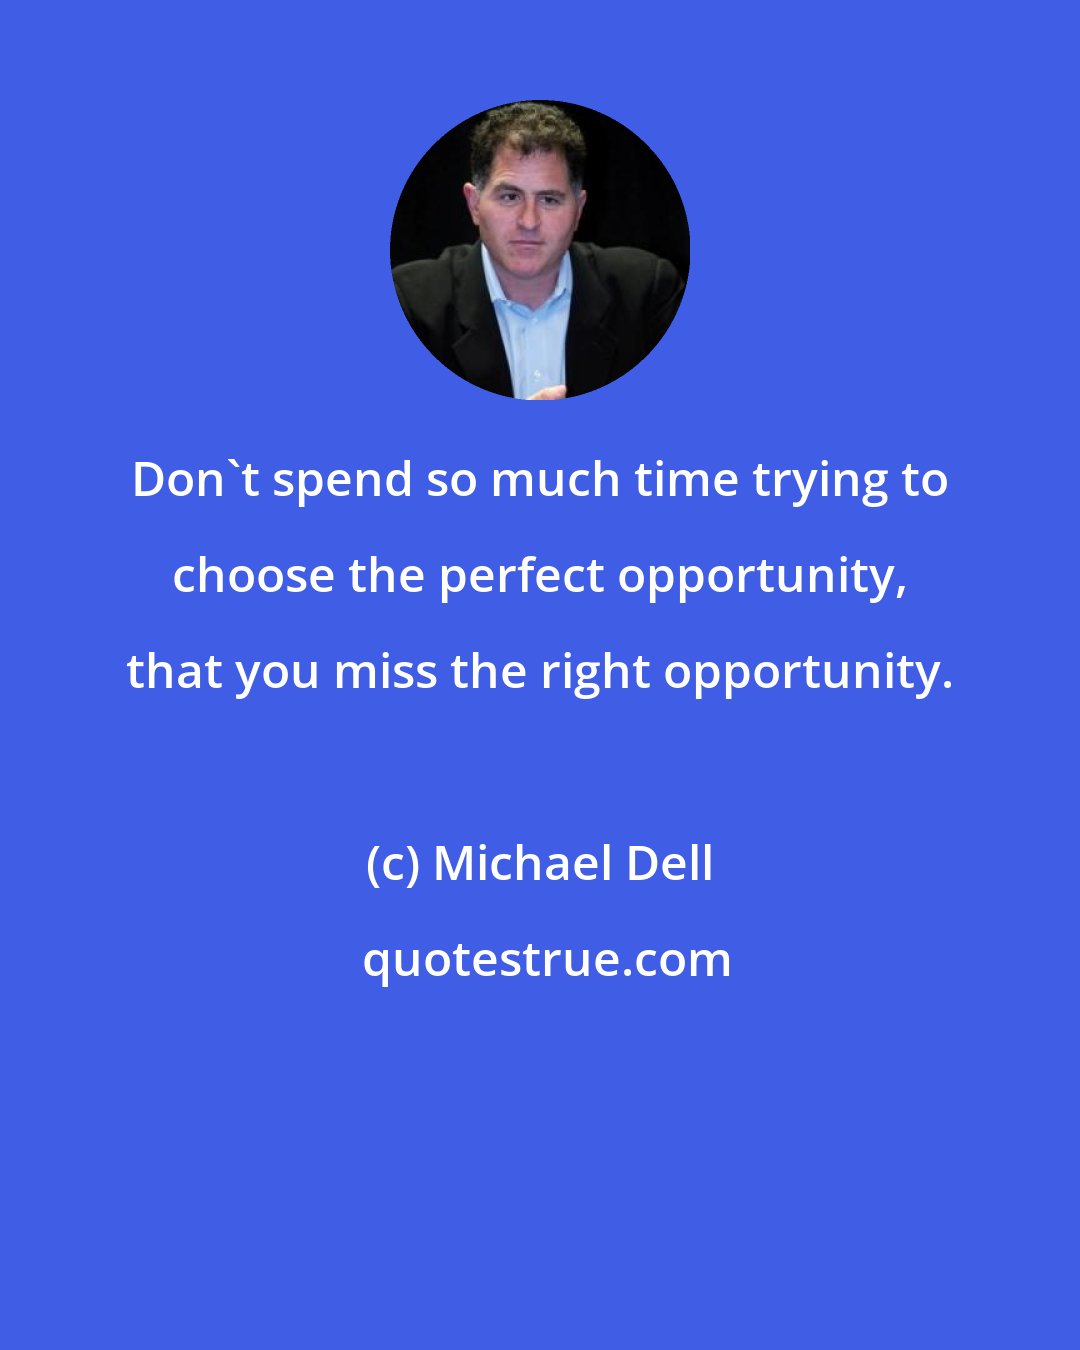 Michael Dell: Don't spend so much time trying to choose the perfect opportunity, that you miss the right opportunity.